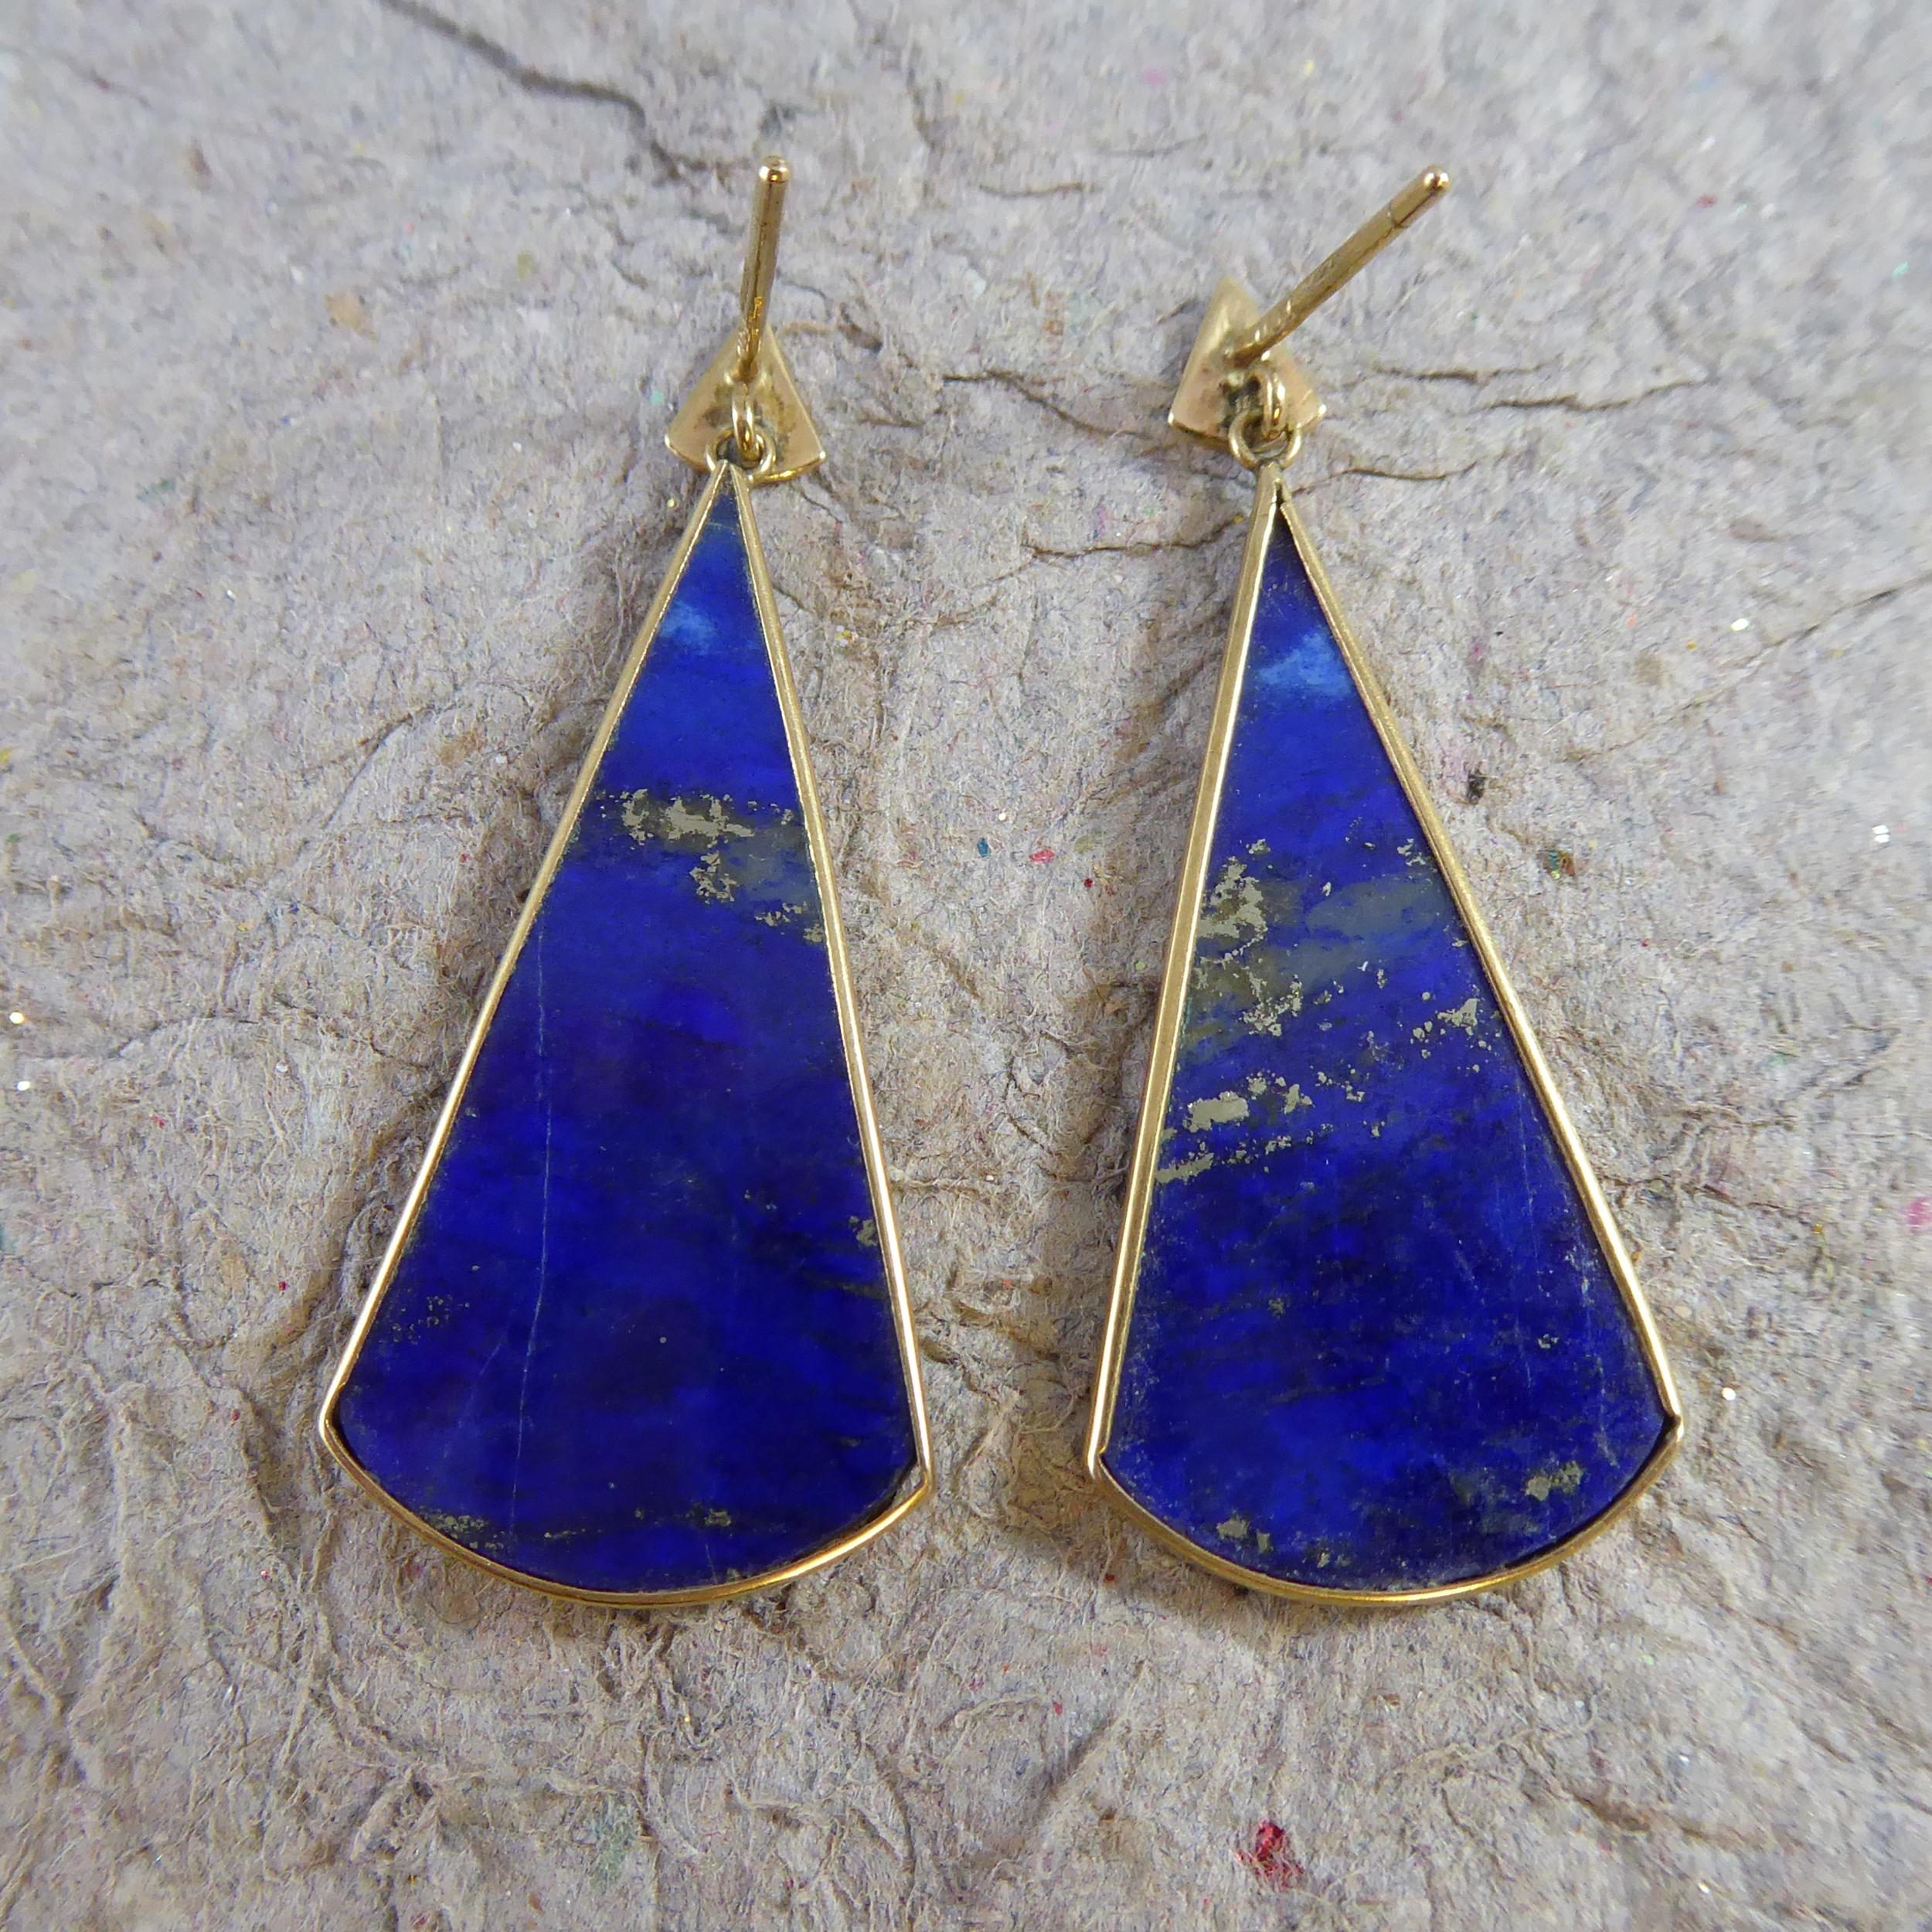 Tumbled Contemporary Designer Drop Earrings with Lapis Lazuli